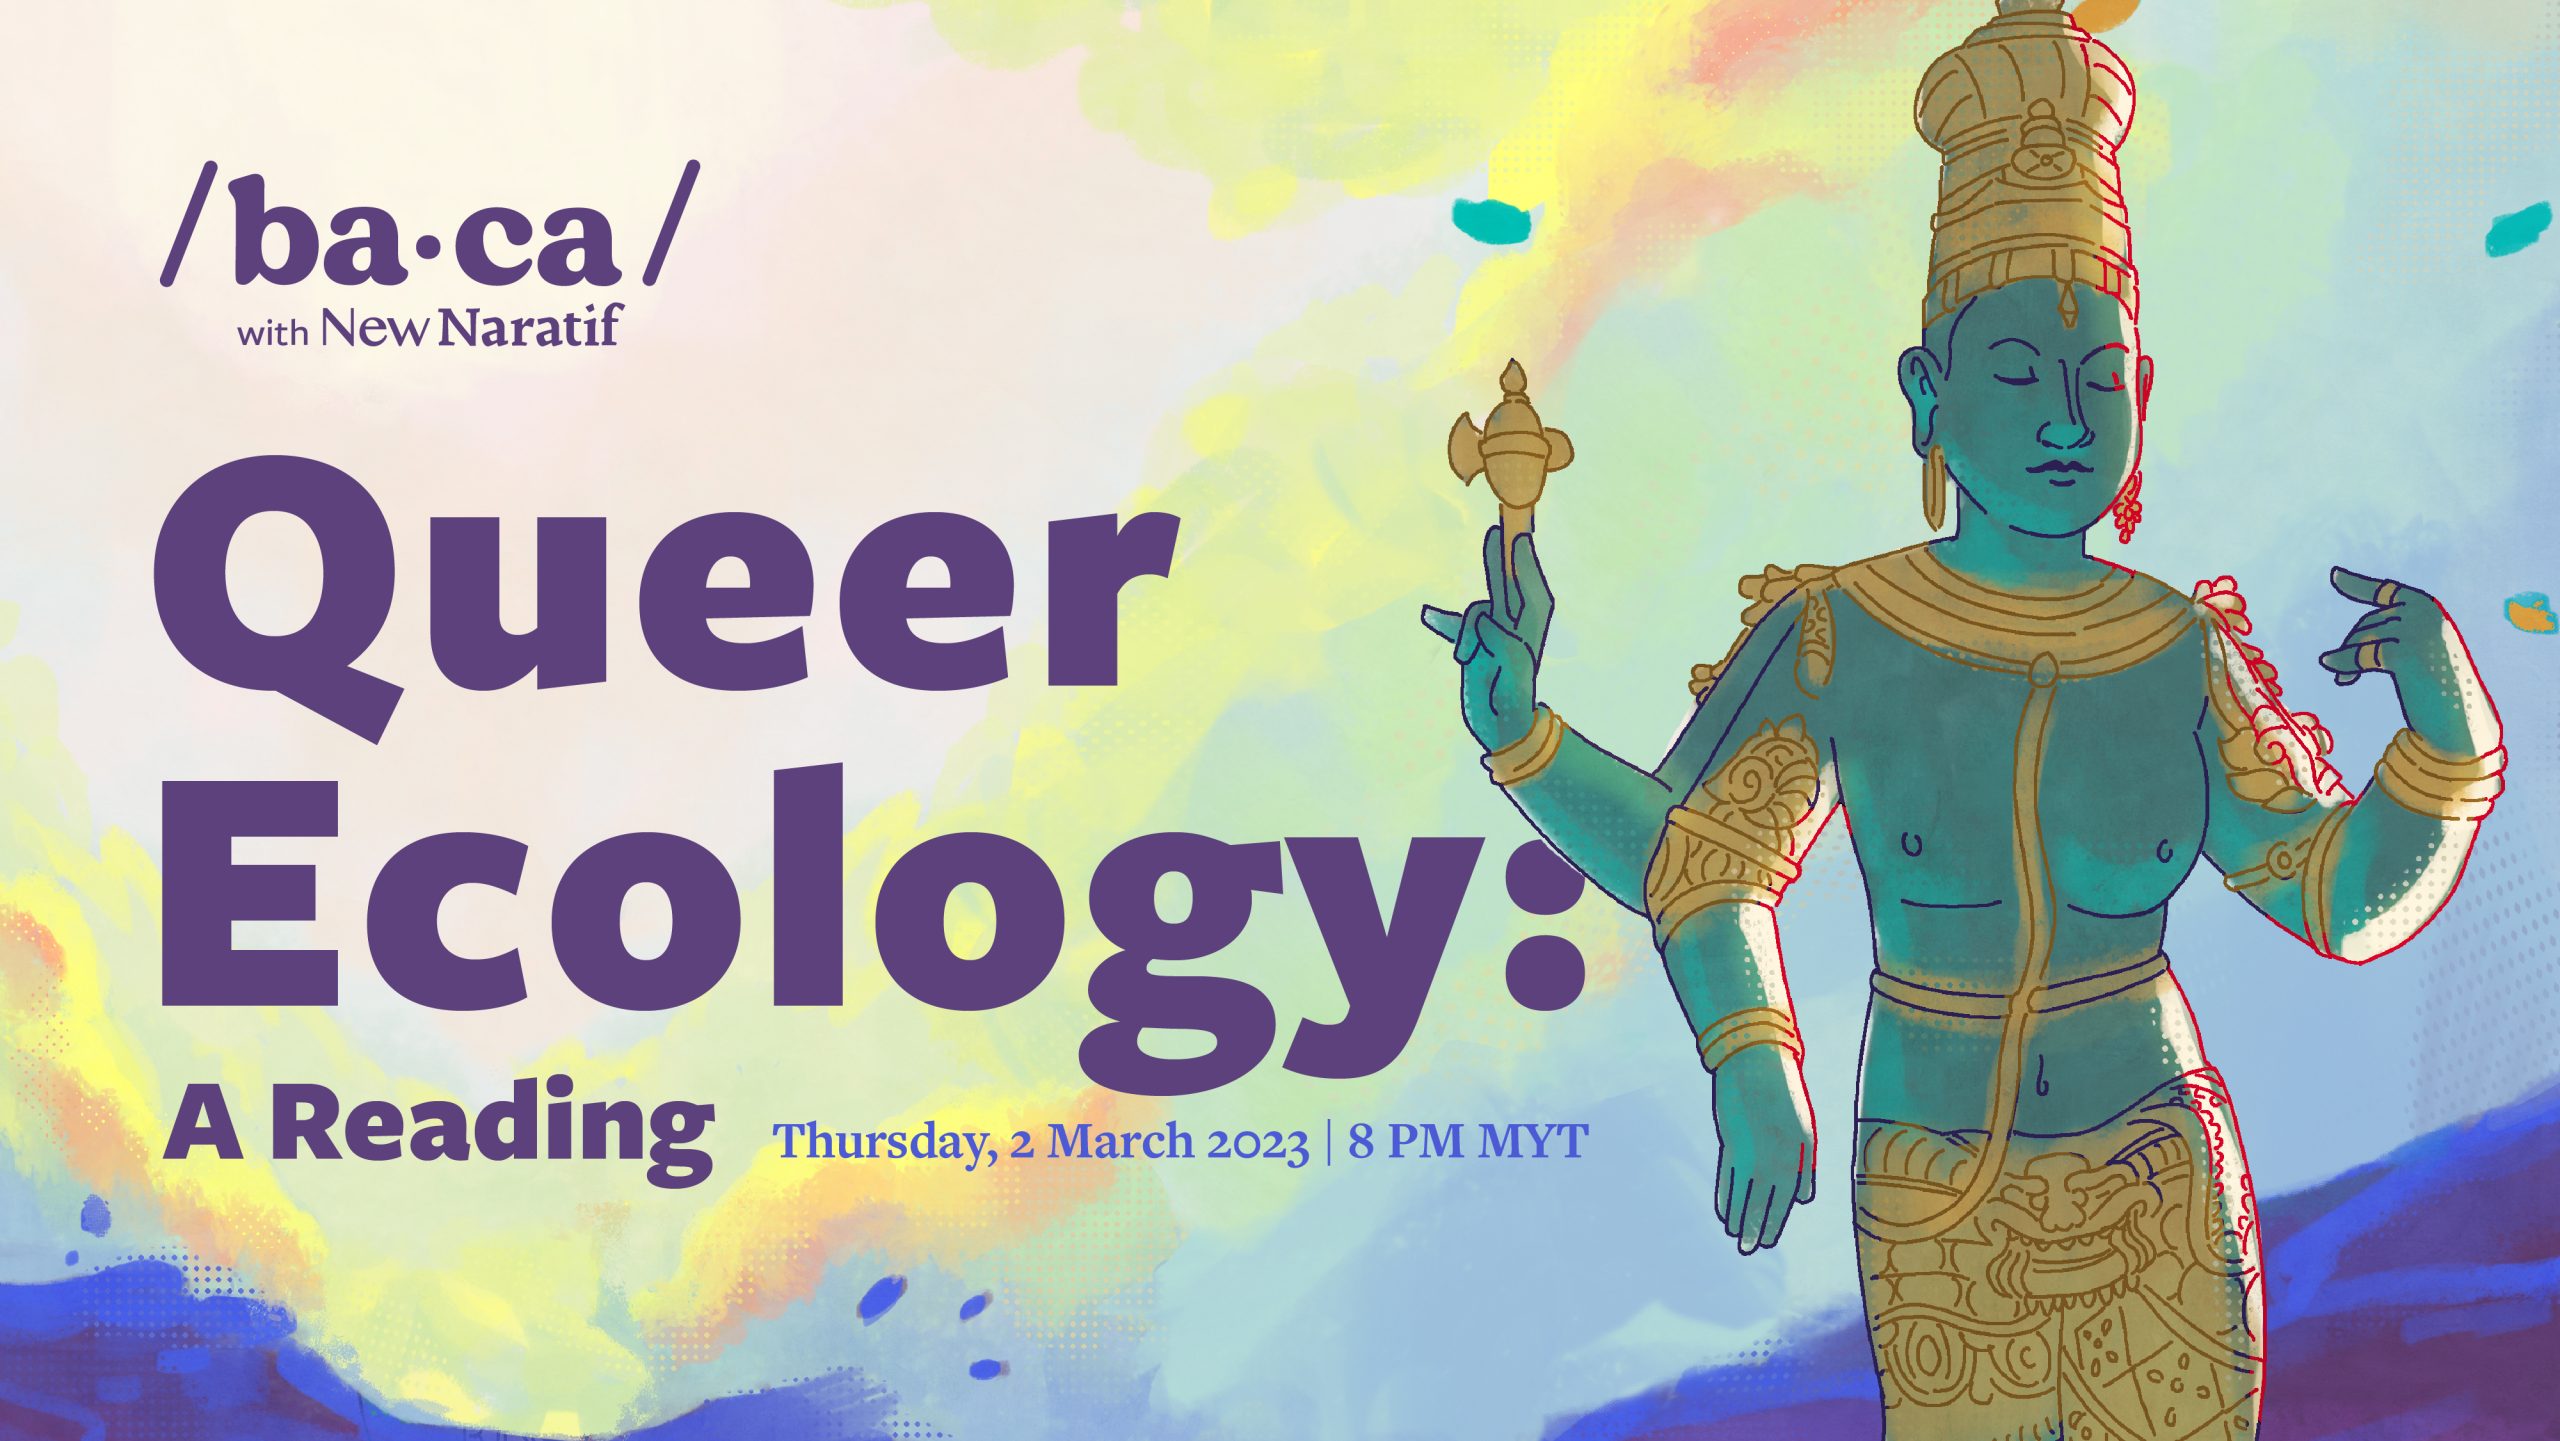 Baca with New Naratif. Queer Ecology: A Reading. March 2, Thursday, 8 pm MYT.